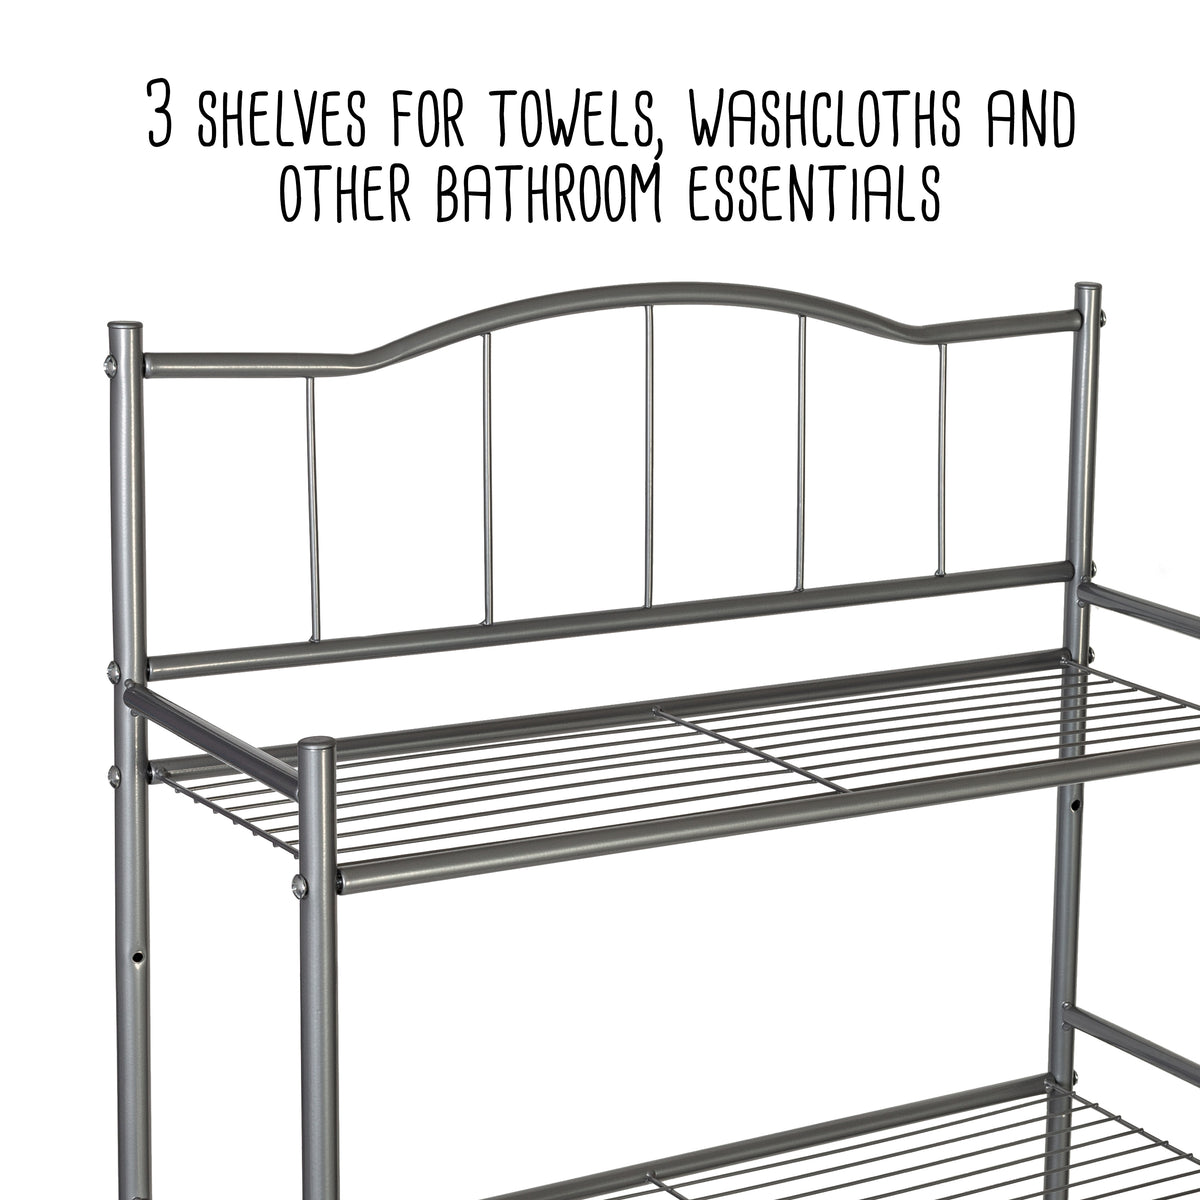 Dropship Bathroom Cabinet. Rustic Gray 26 W Bathroom Space Saver Better  Homes And Gardens Above Toilet Storage Cabinet to Sell Online at a Lower  Price